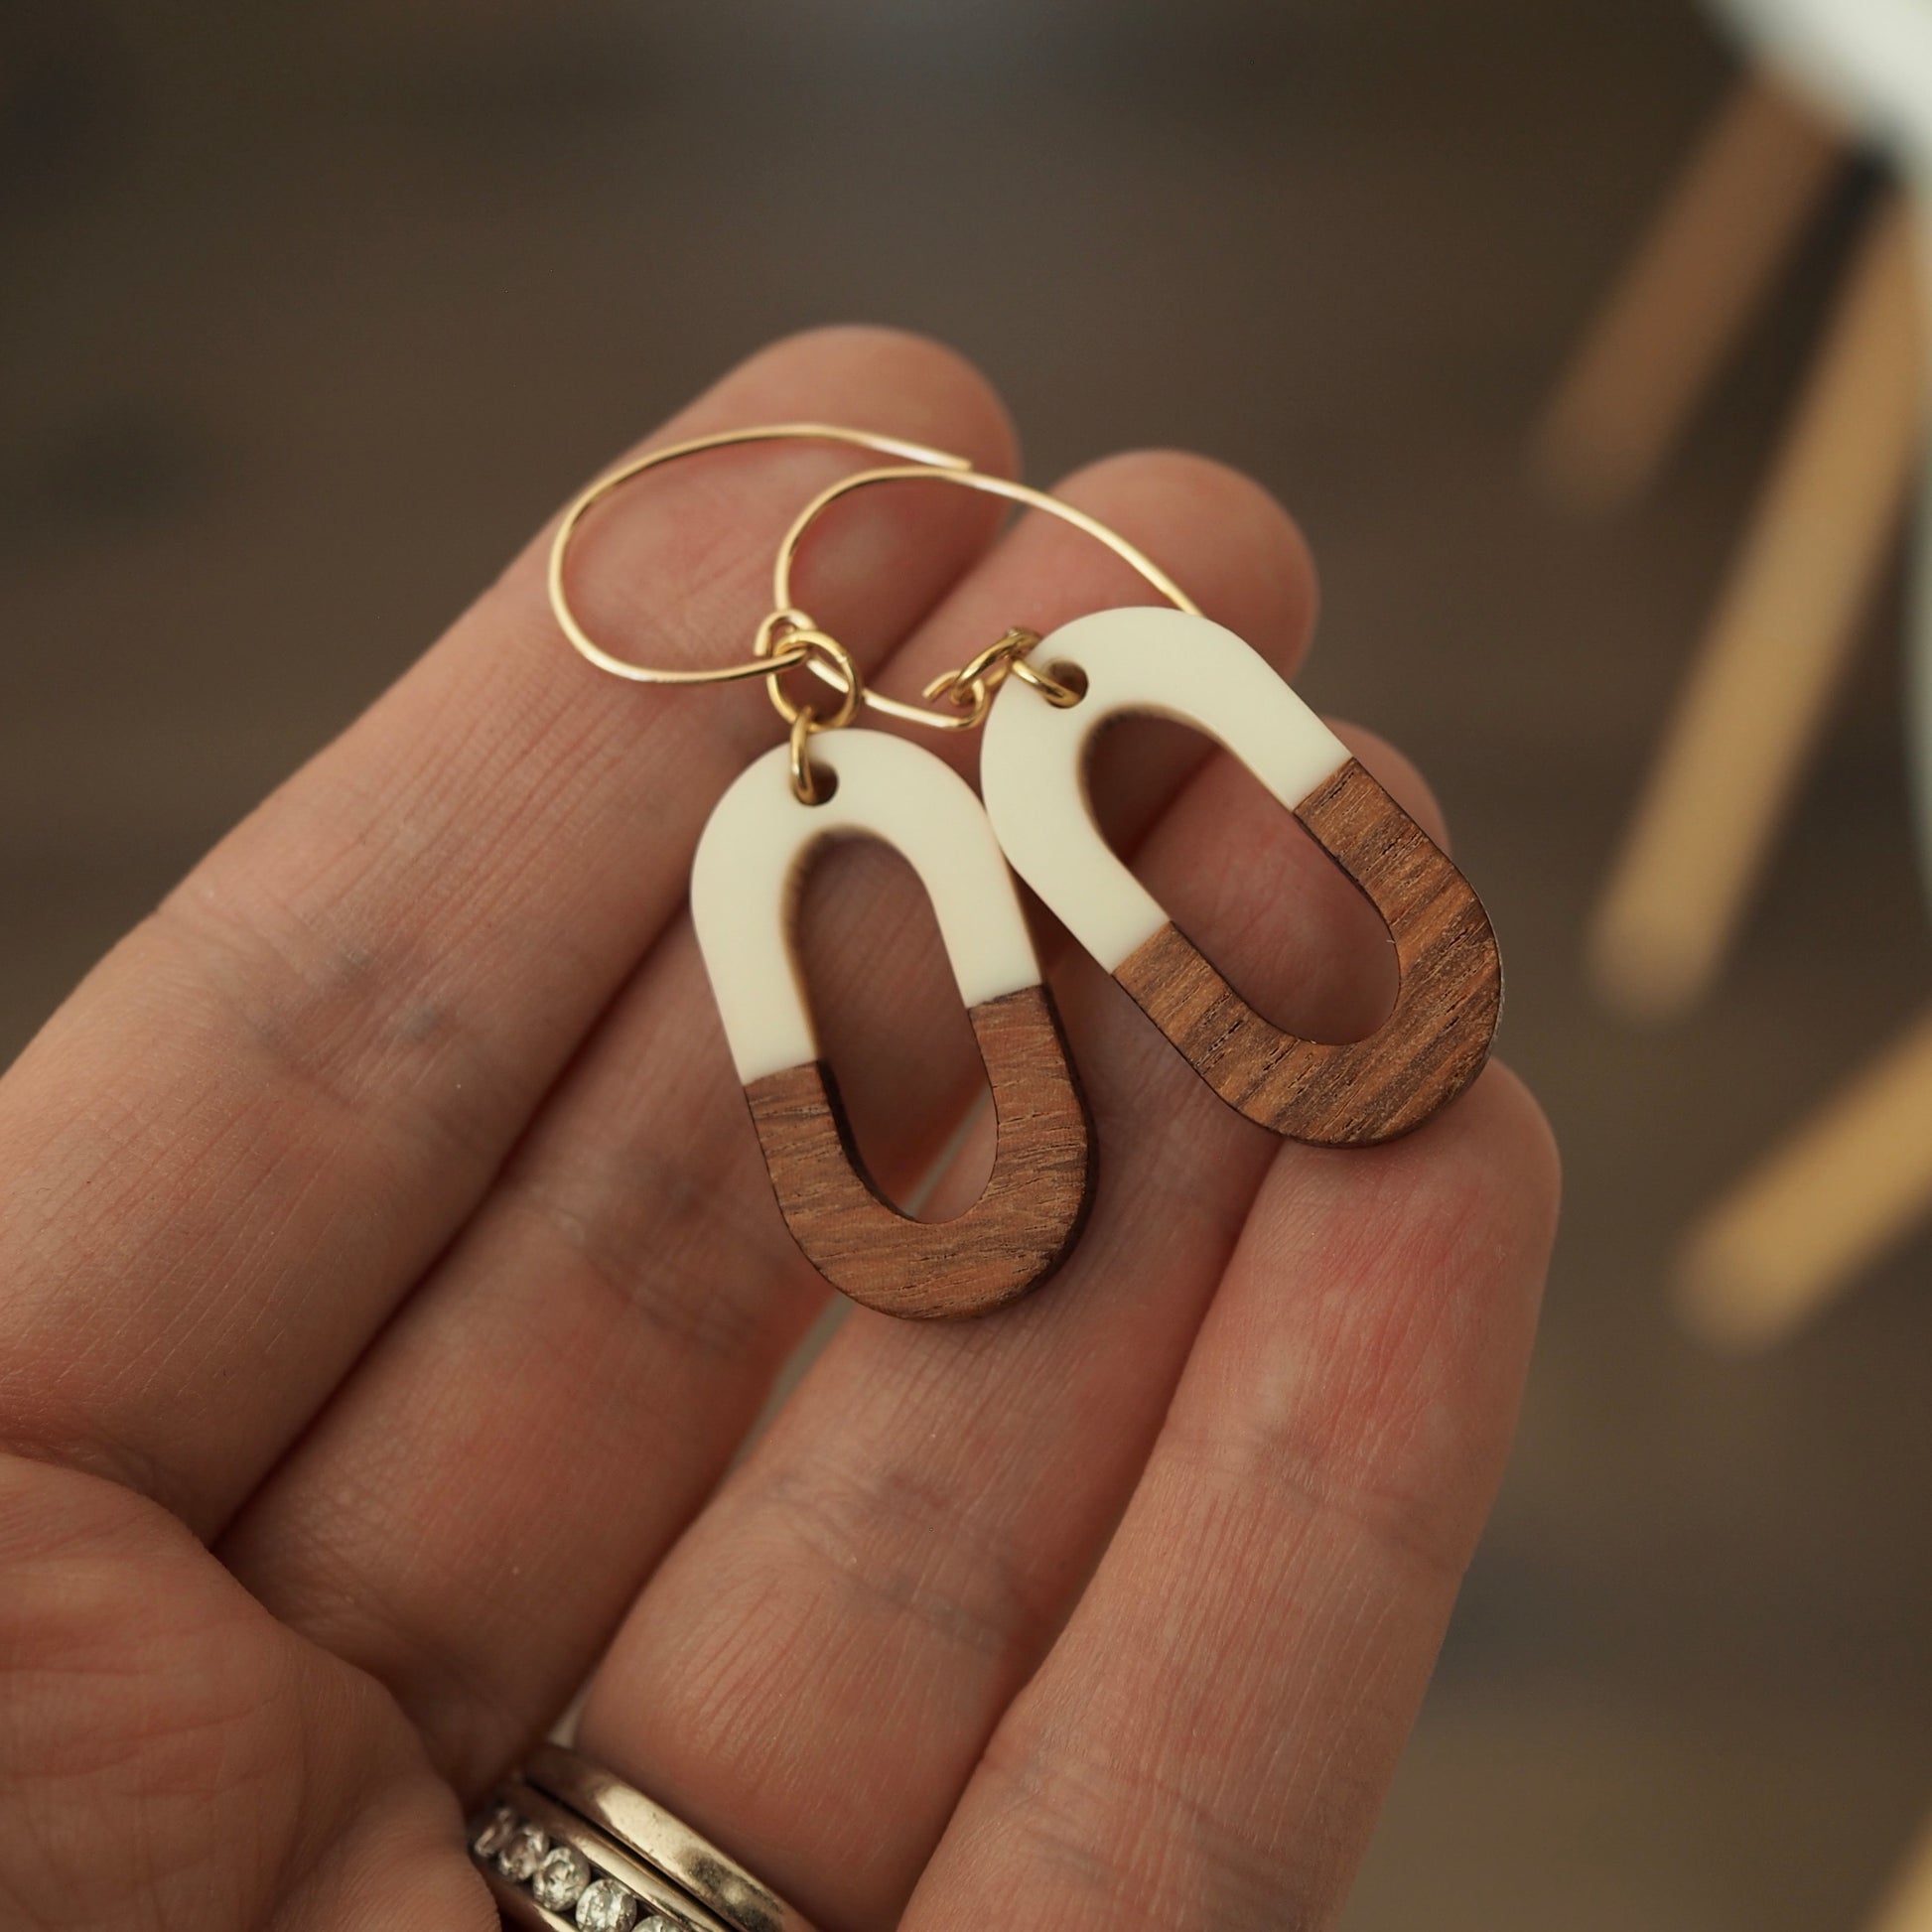 Fall Earrings with wood ovals by Wallis Designs in Canada